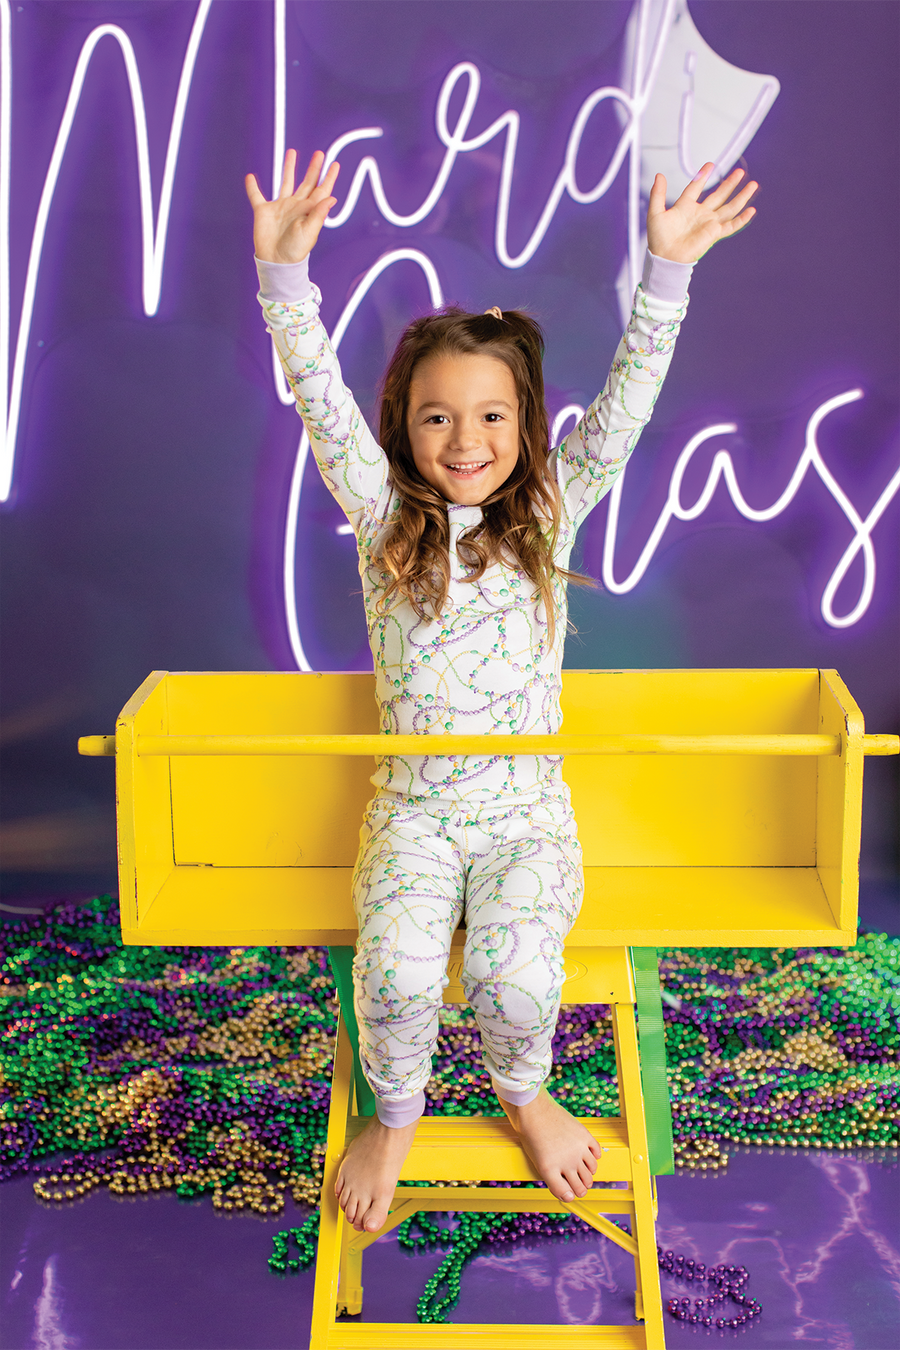 just-here-for-the-beads-organic-kids-mardi-gras-clothes